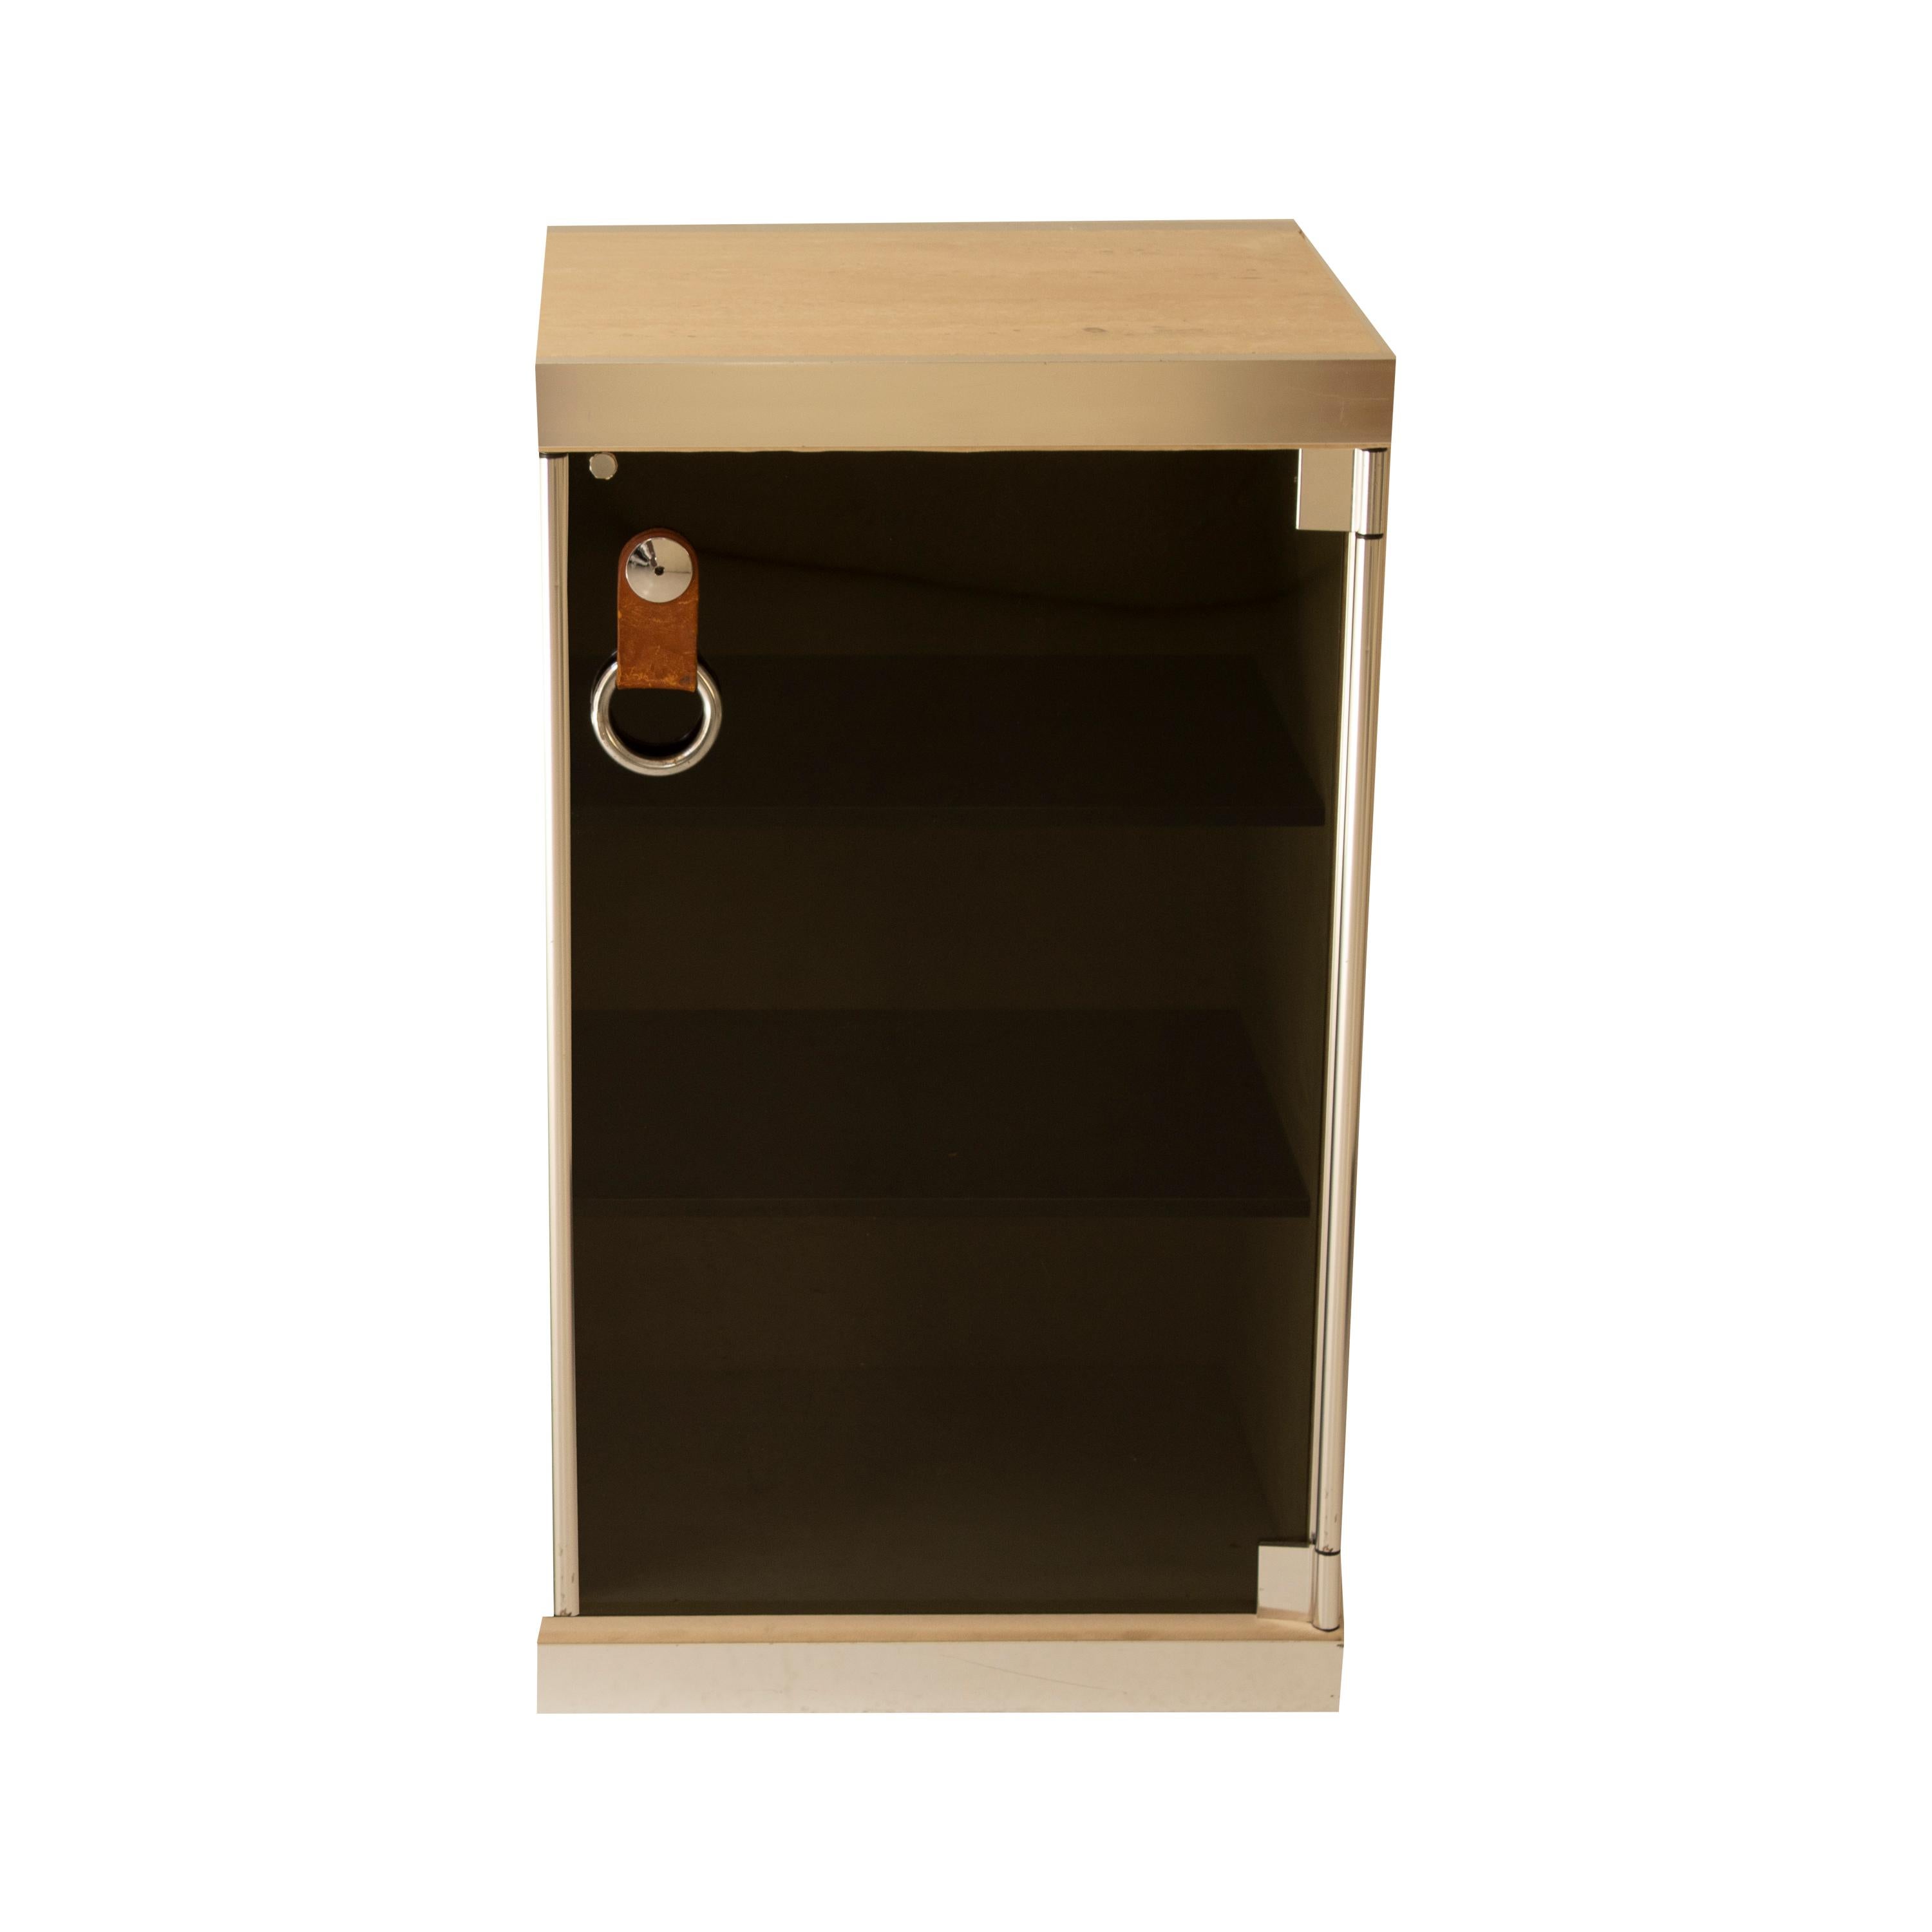 Mid-Century Modern cabinet designed in 1970 by the Italian designer Guido Faleschini for Hermes. 
The cabinet consists of a metal frame, a travertine marble top, and a beige velvet cover on the sides.
The door is made of black tinted glass, with